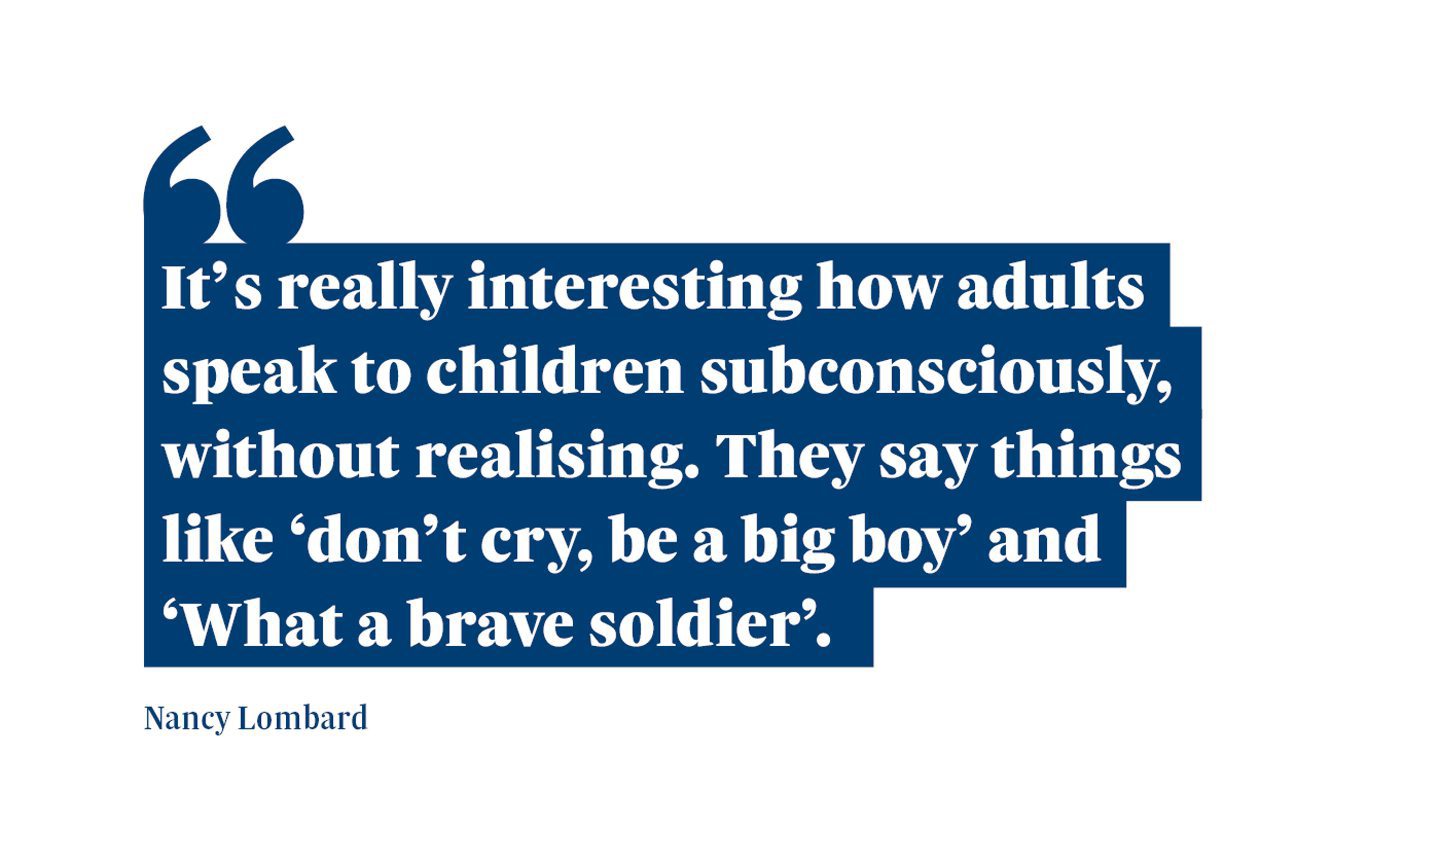 A quote from Nancy Lombard saying: “It’s really interesting how adults speak to children subconsciously, without realising. They say things like ‘don’t cry, be a big boy’ and ‘What a brave soldier’.